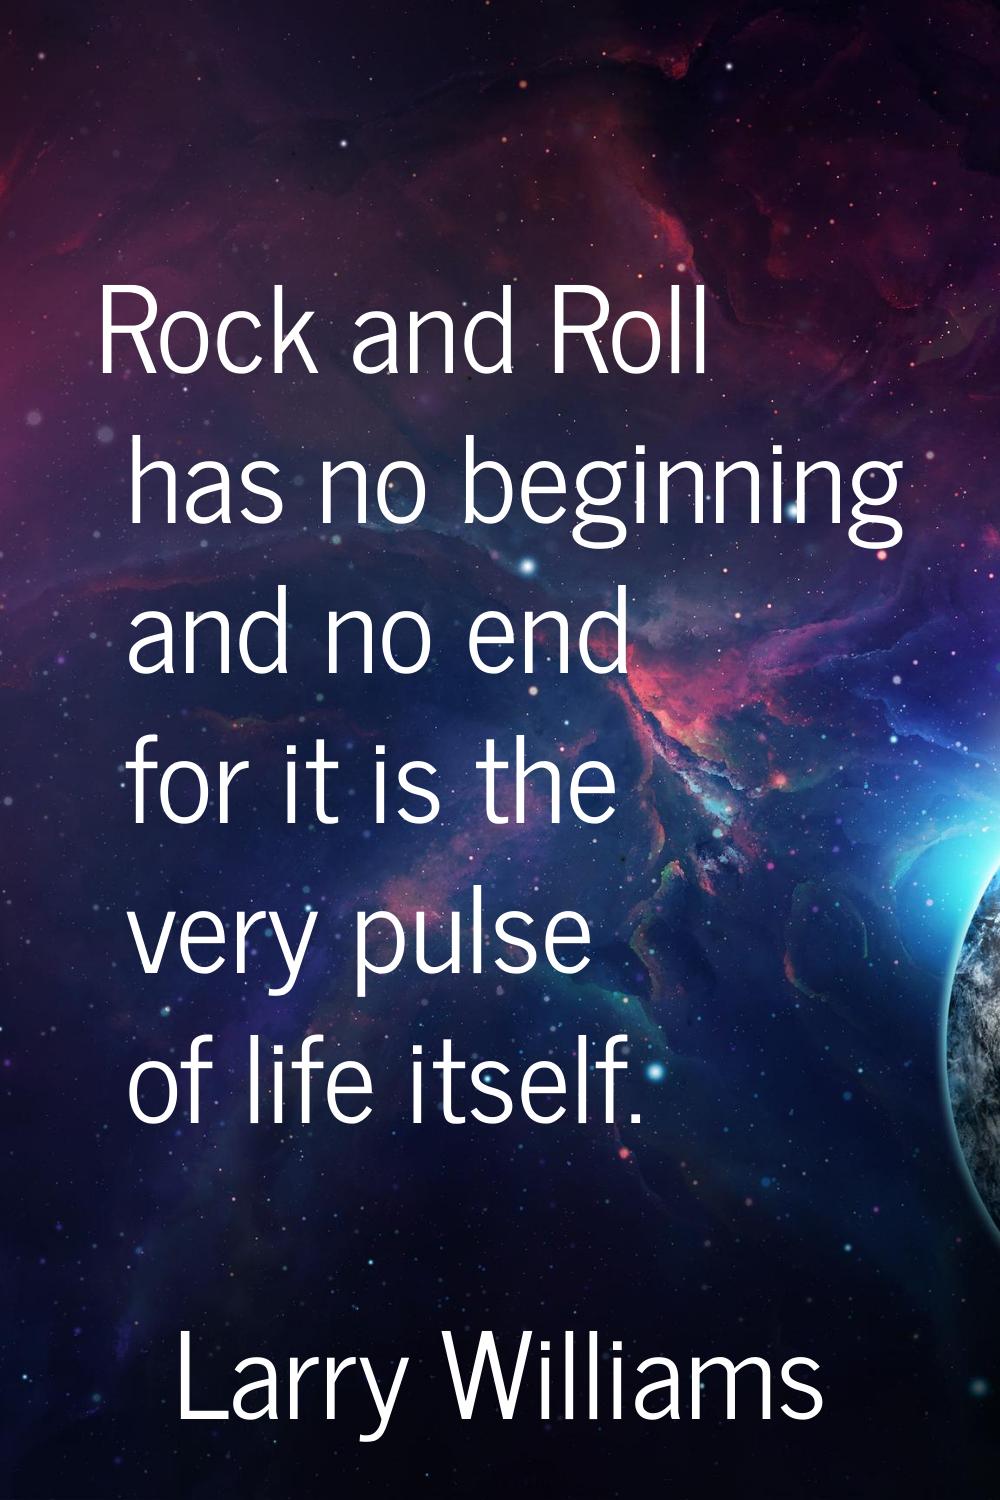 Rock and Roll has no beginning and no end for it is the very pulse of life itself.